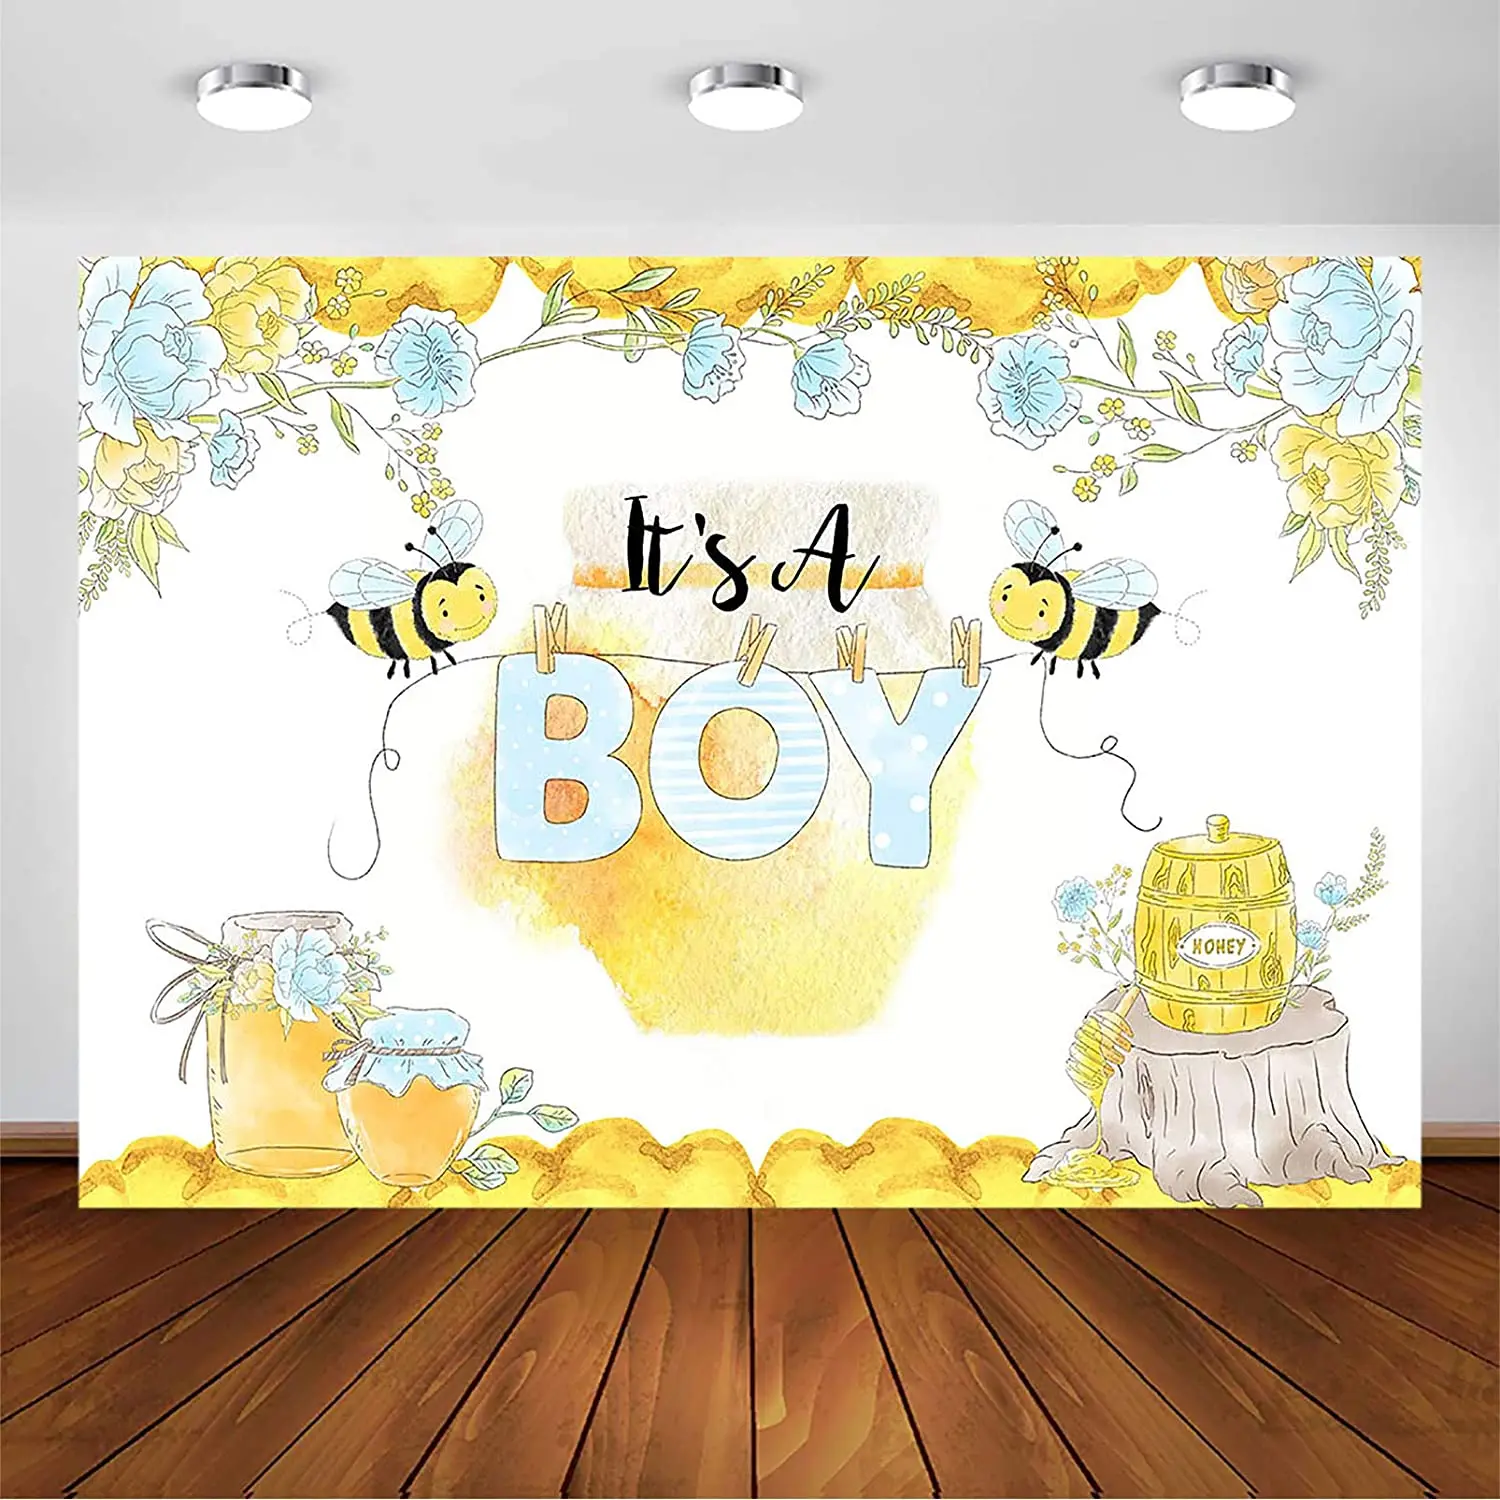 Honeycomb Bee Baby Shower Backdrop for Boy Honey Bee Day It's A Boys Baby Shower Party Photoshoot Photography Background